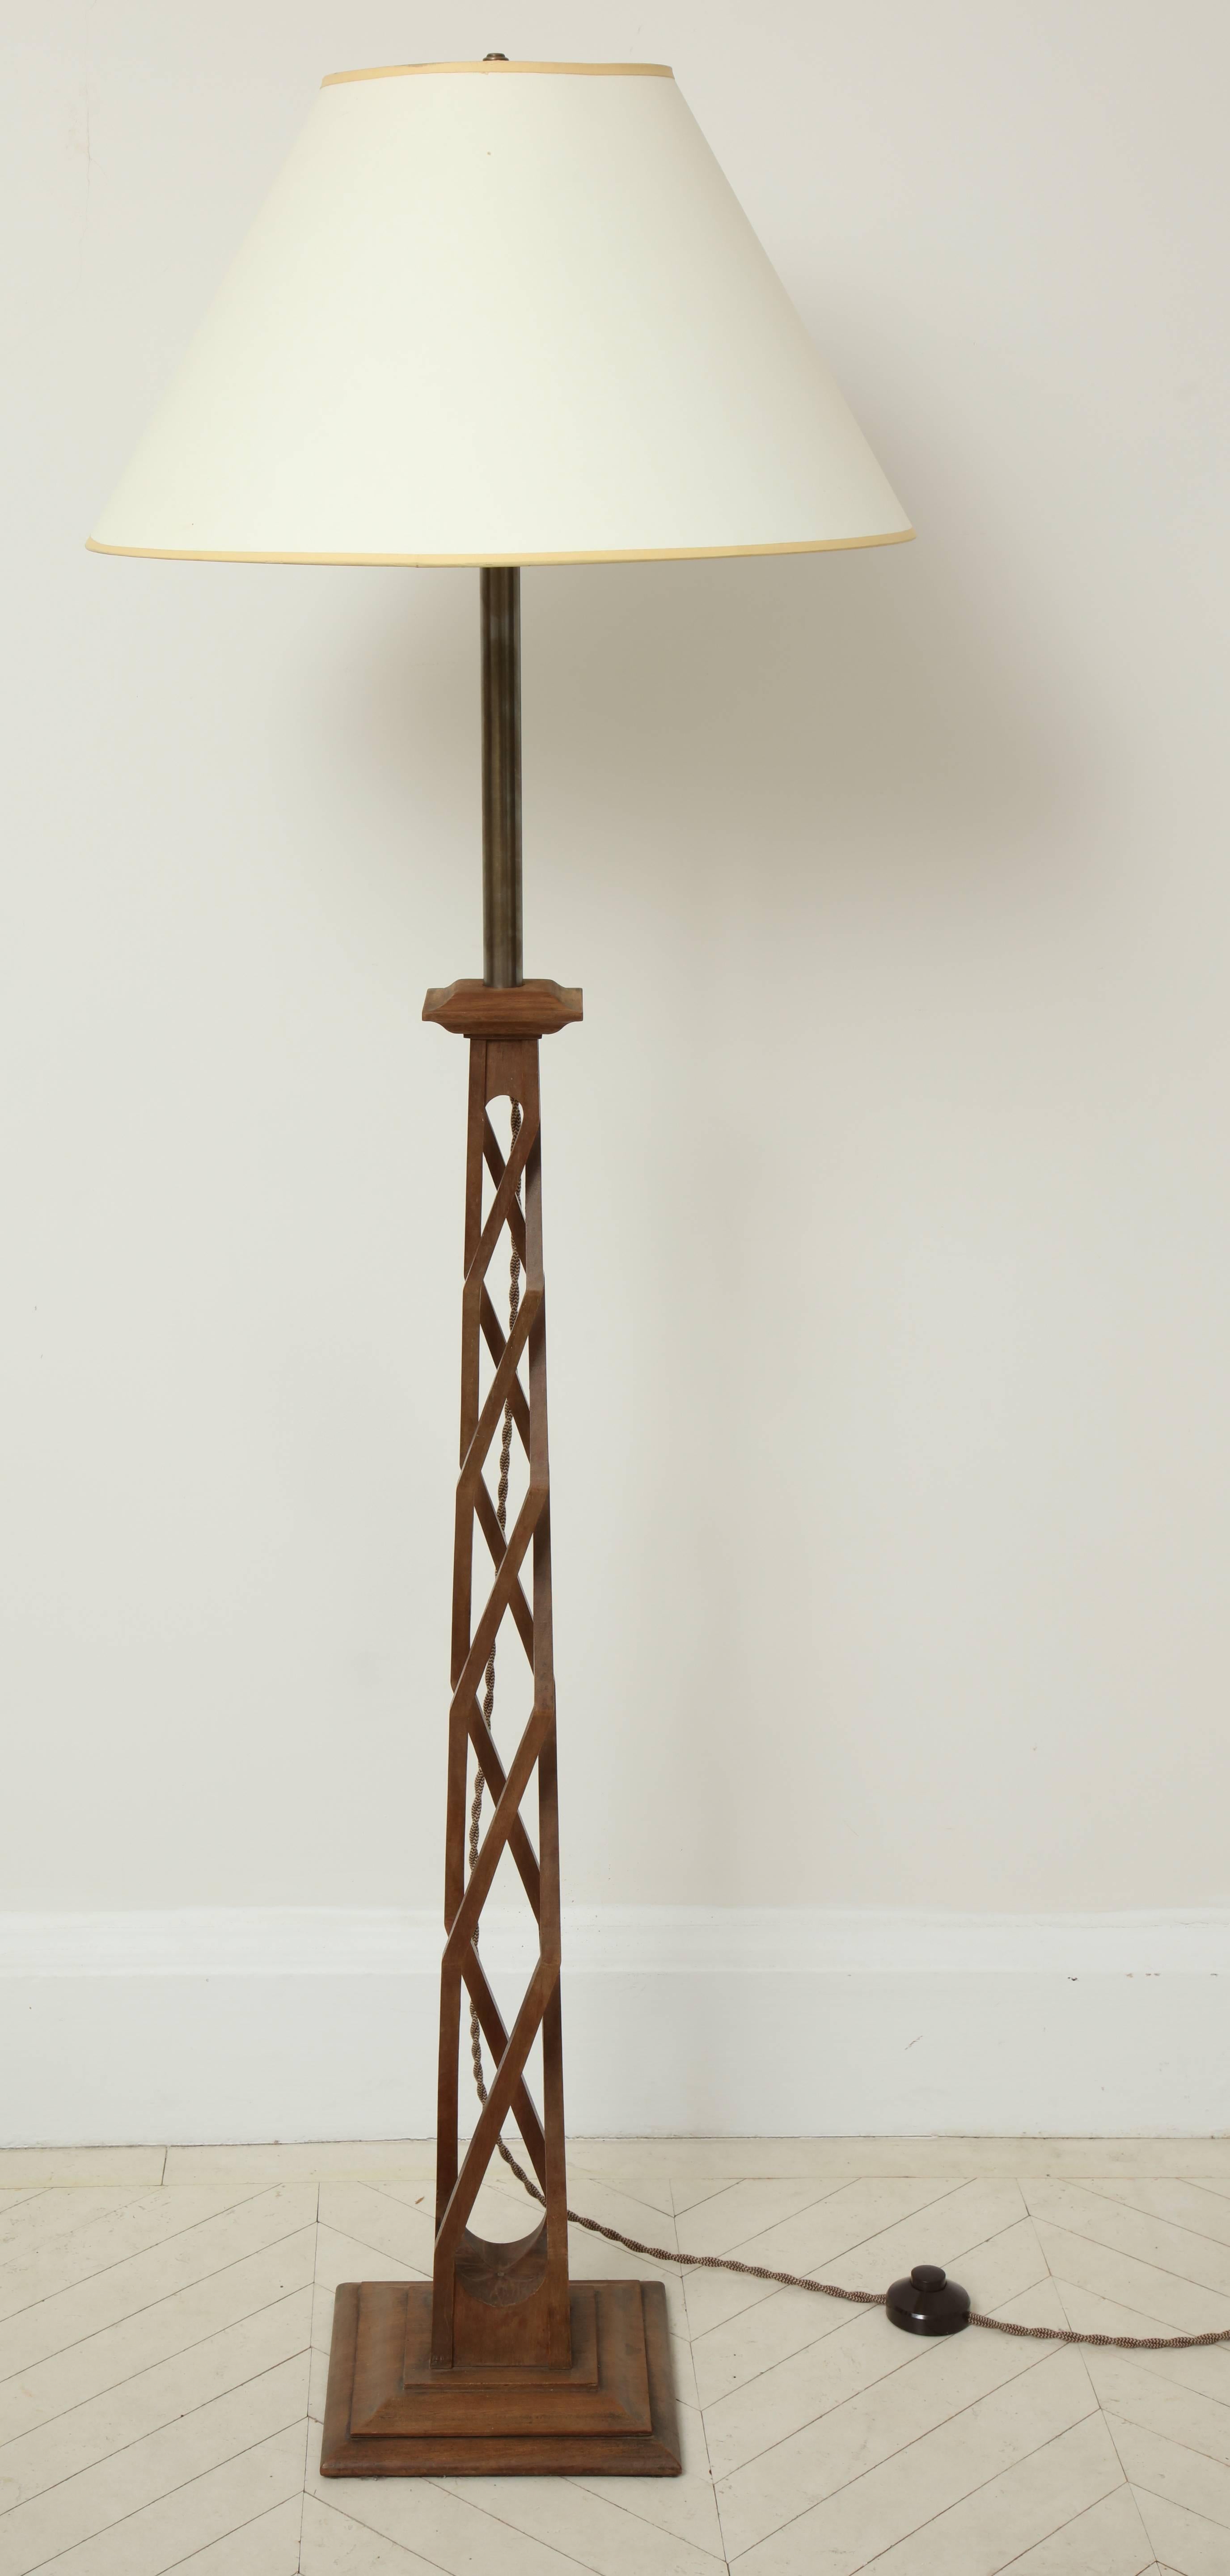 A 20th century English carved walnut helix base standing lamp.